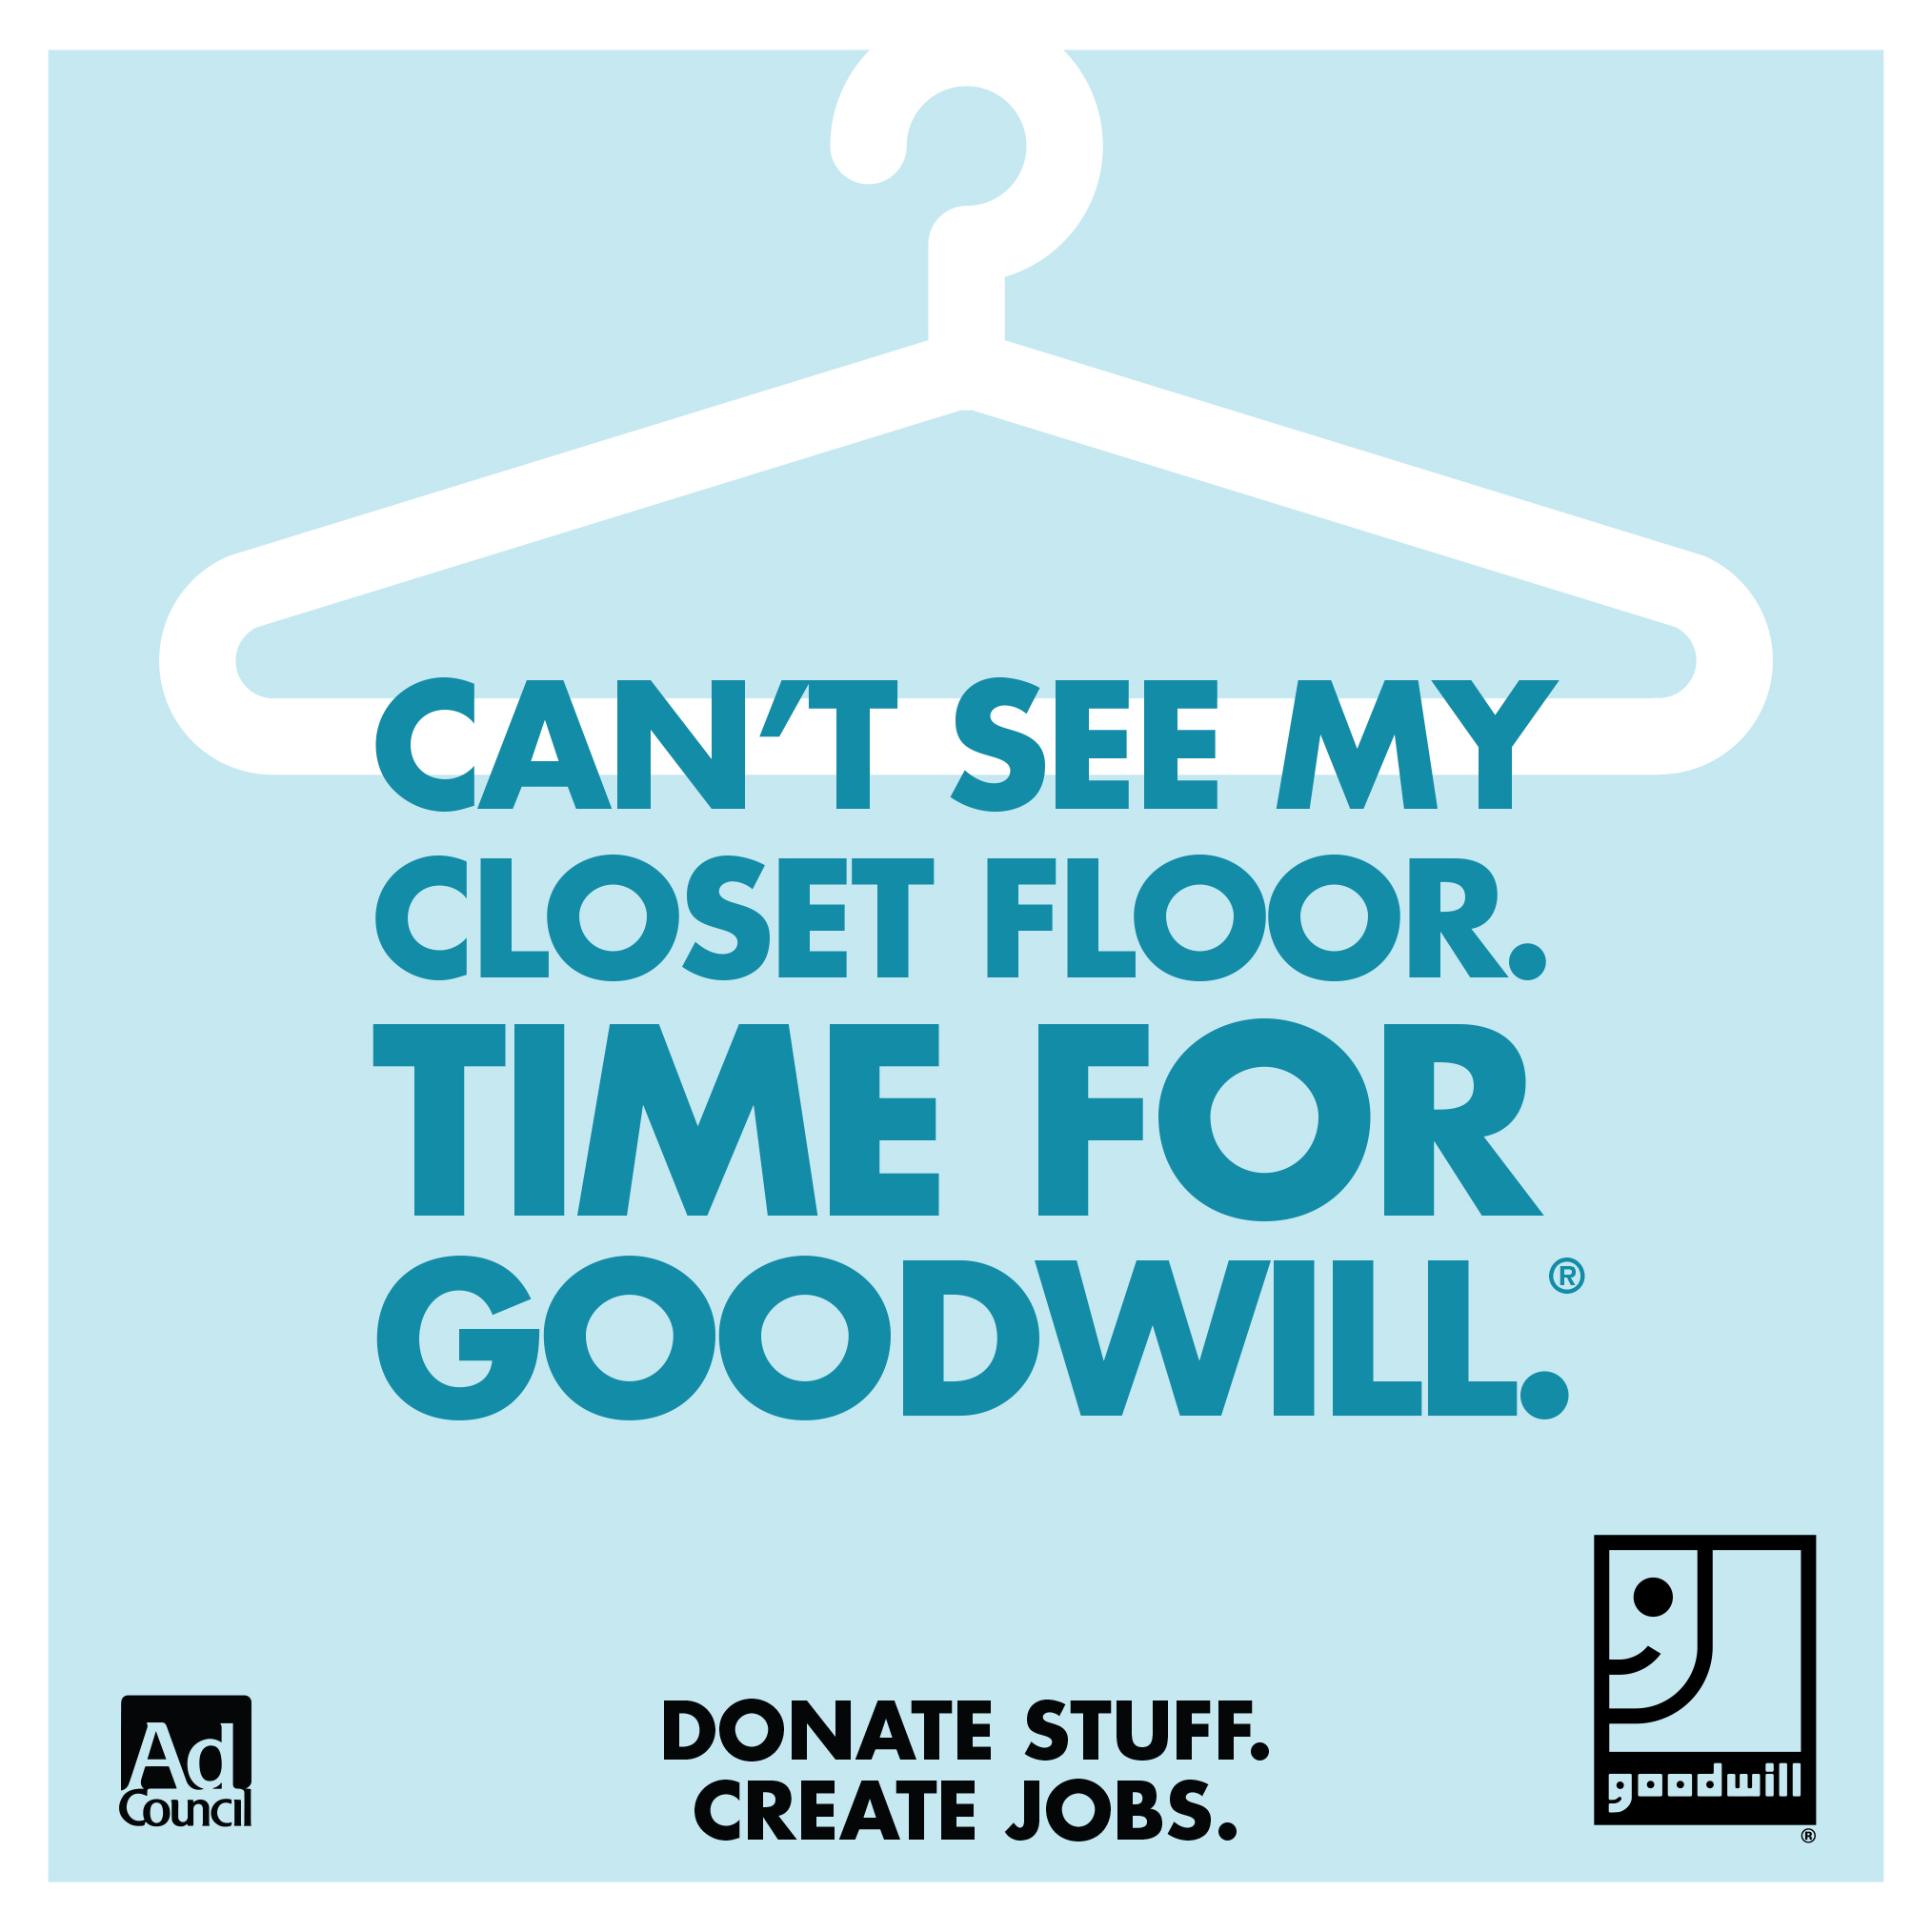 Goodwill_FB_SpringCleaning_FINAL4.indd